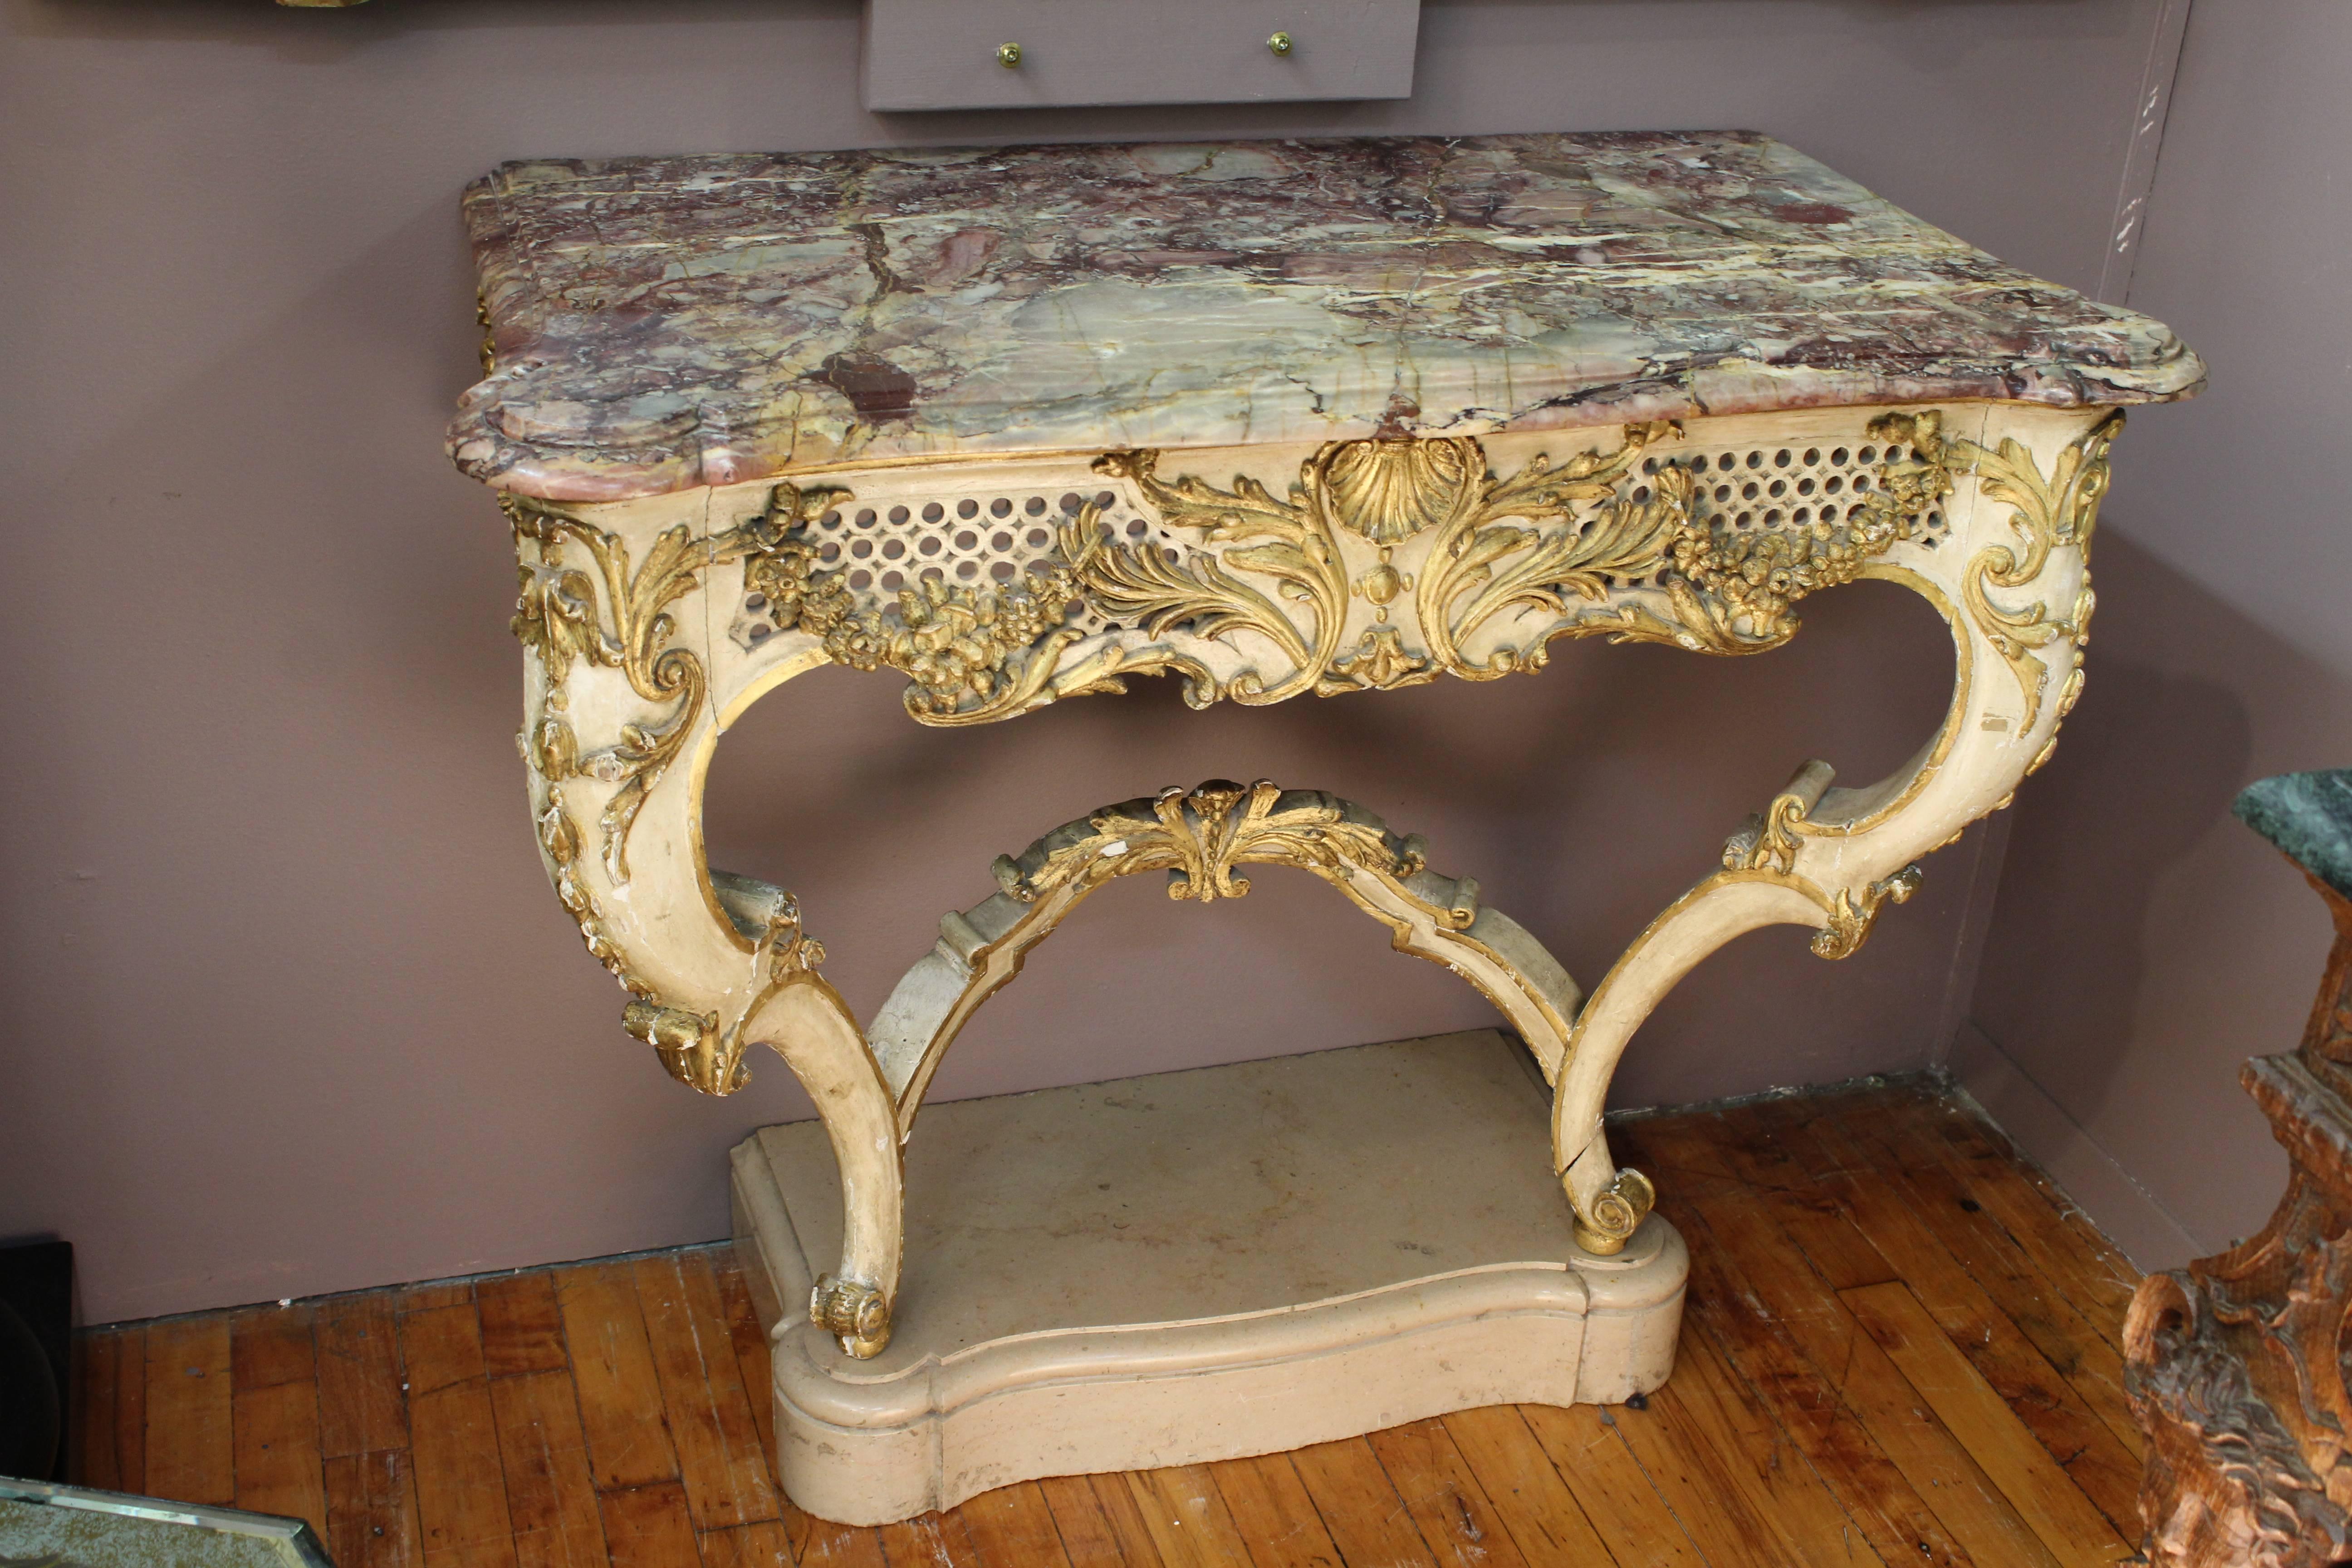 A French 19th century console table after the Rococo style with a purple marble top. The base is painted in white with gilt accents and stands on curved legs atop a marble piece. The console is carved with a circular motif, garlands, acanthus leaves